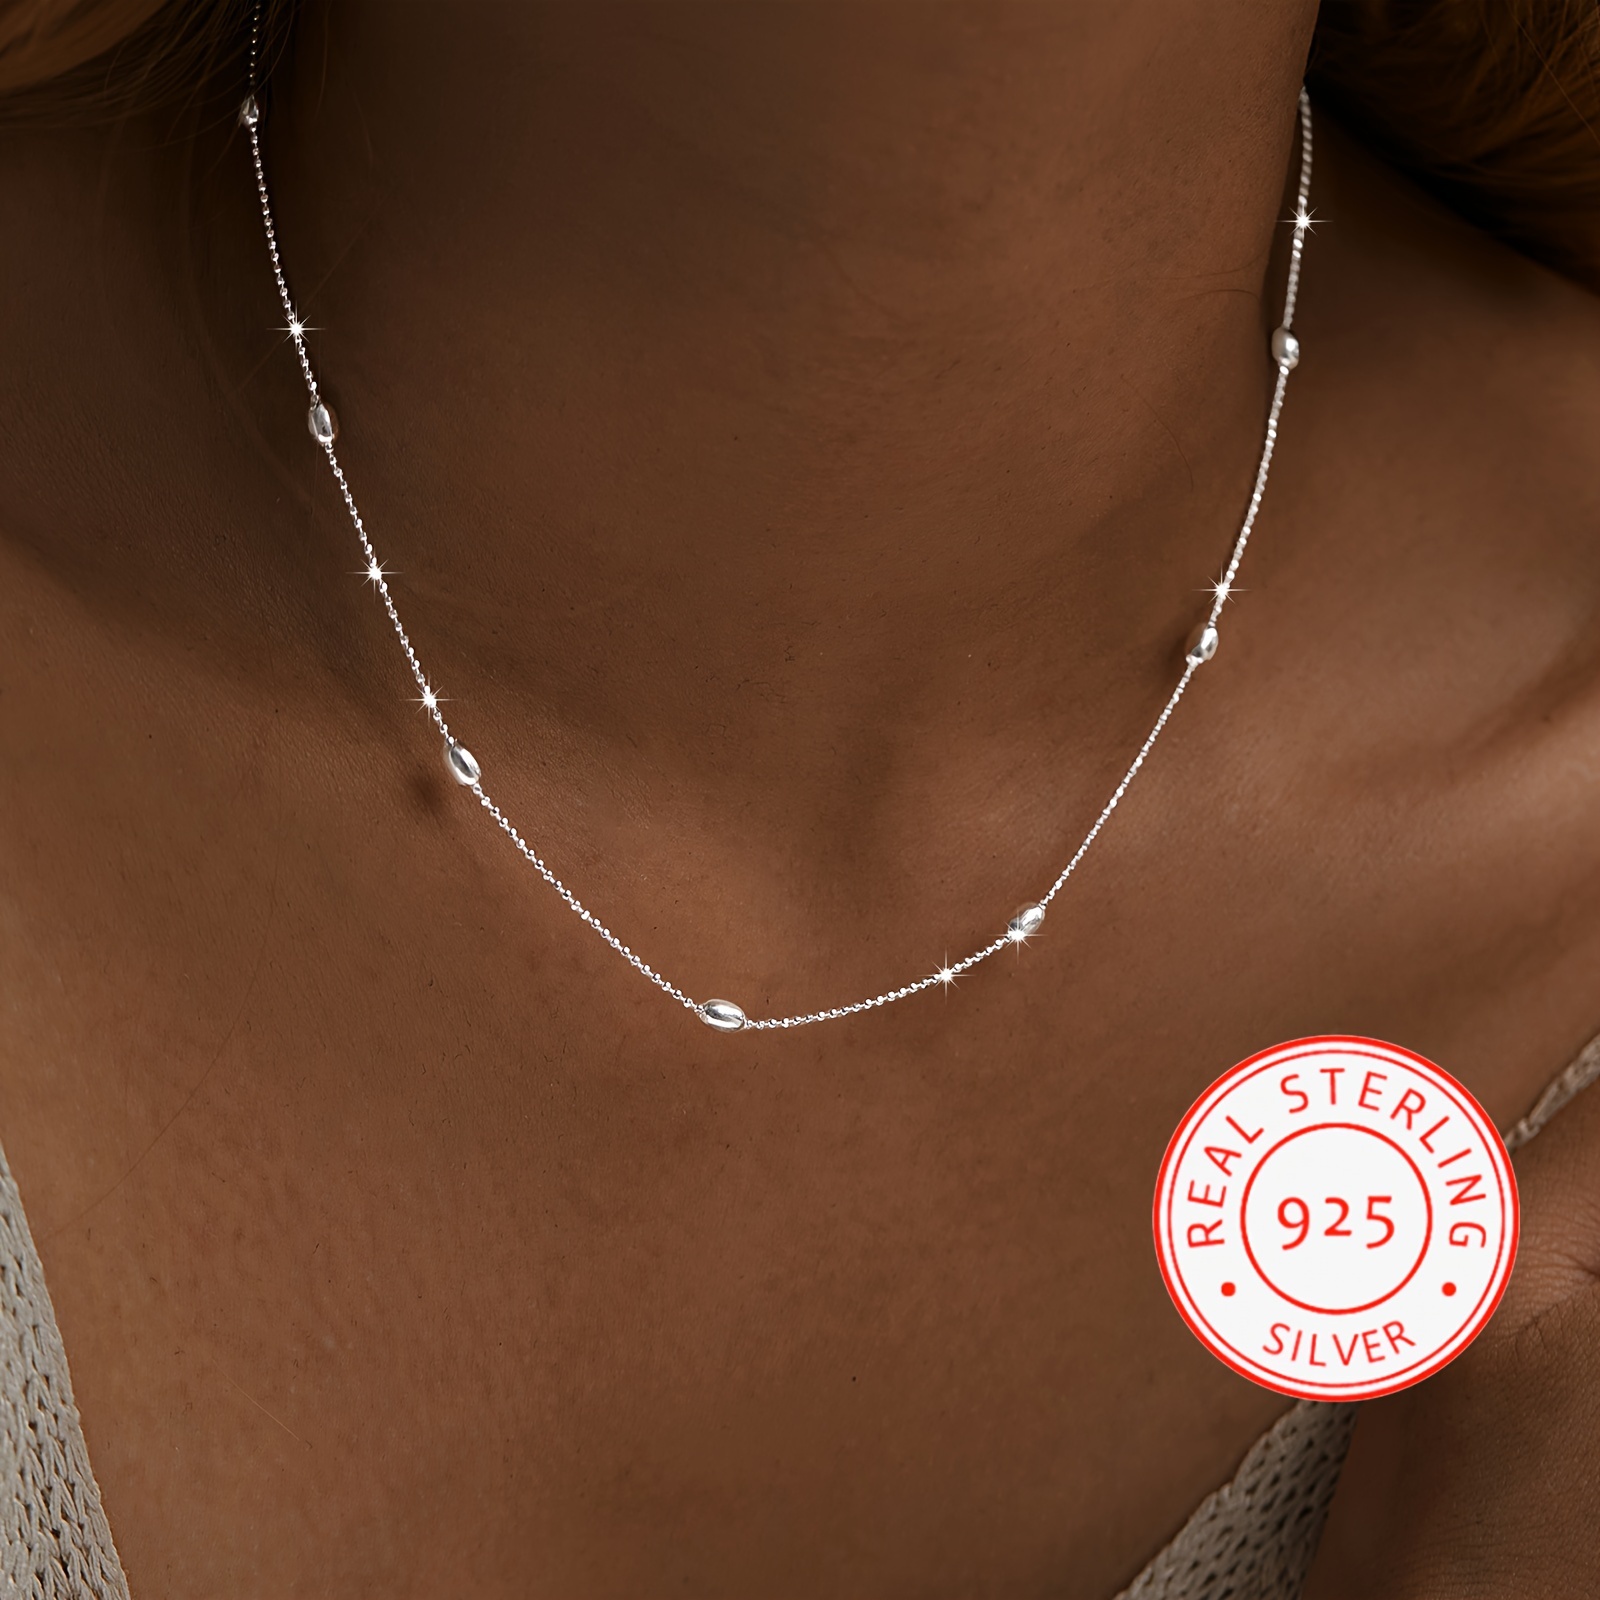 

Elegant Sterling Silver 925 Beaded Necklace For Women, 3g Lightweight Minimalist Rice Grain Chain, Daily Wear, Simple & Sparkly Style